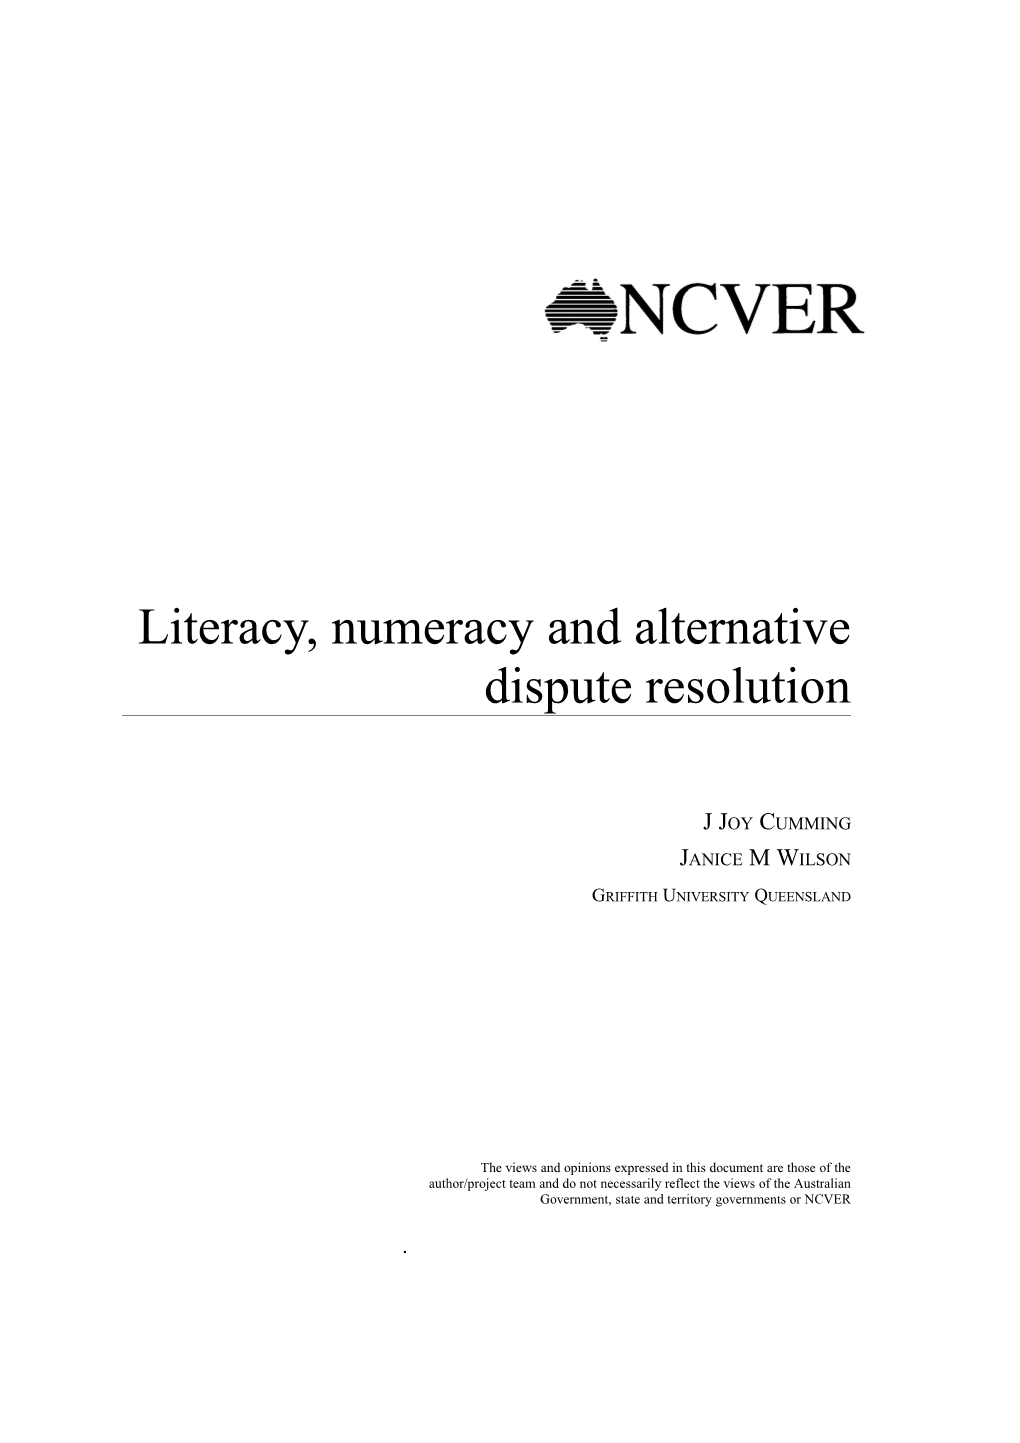 Literacy, Numeracy and ADR